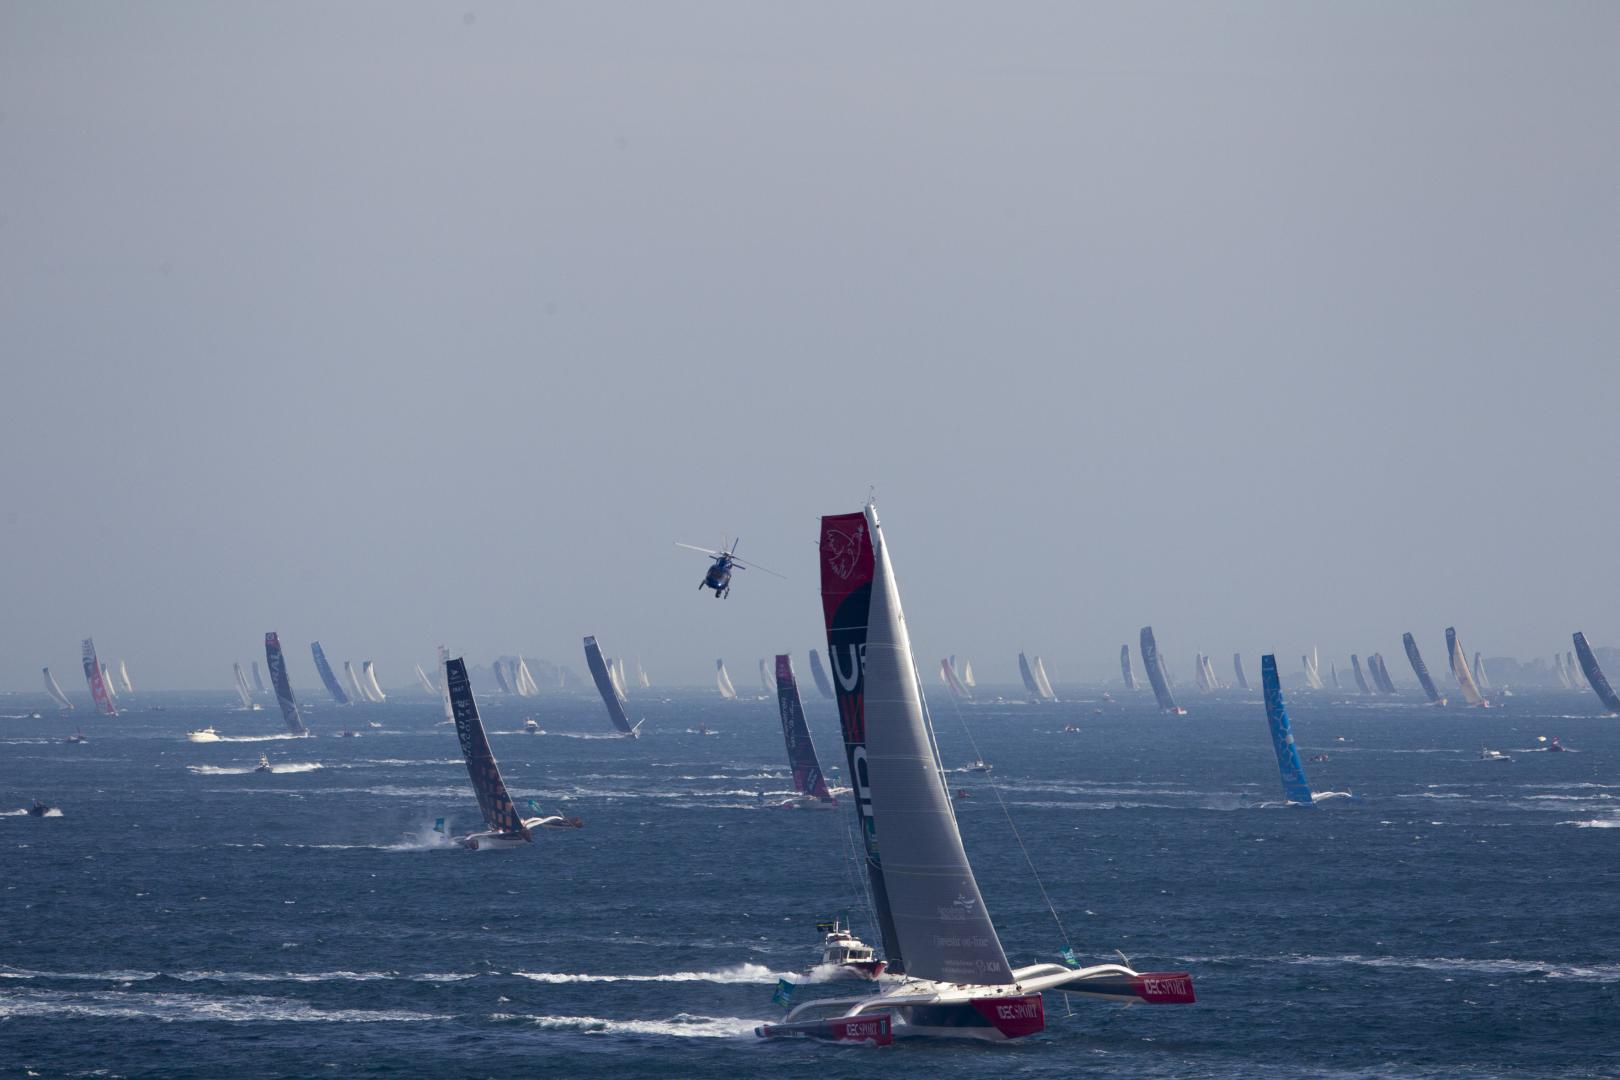 Spectacular scenes off Saint Malo as the 2018 Route du Rhum-Destination Guadeloupe gets underway in perfect conditions